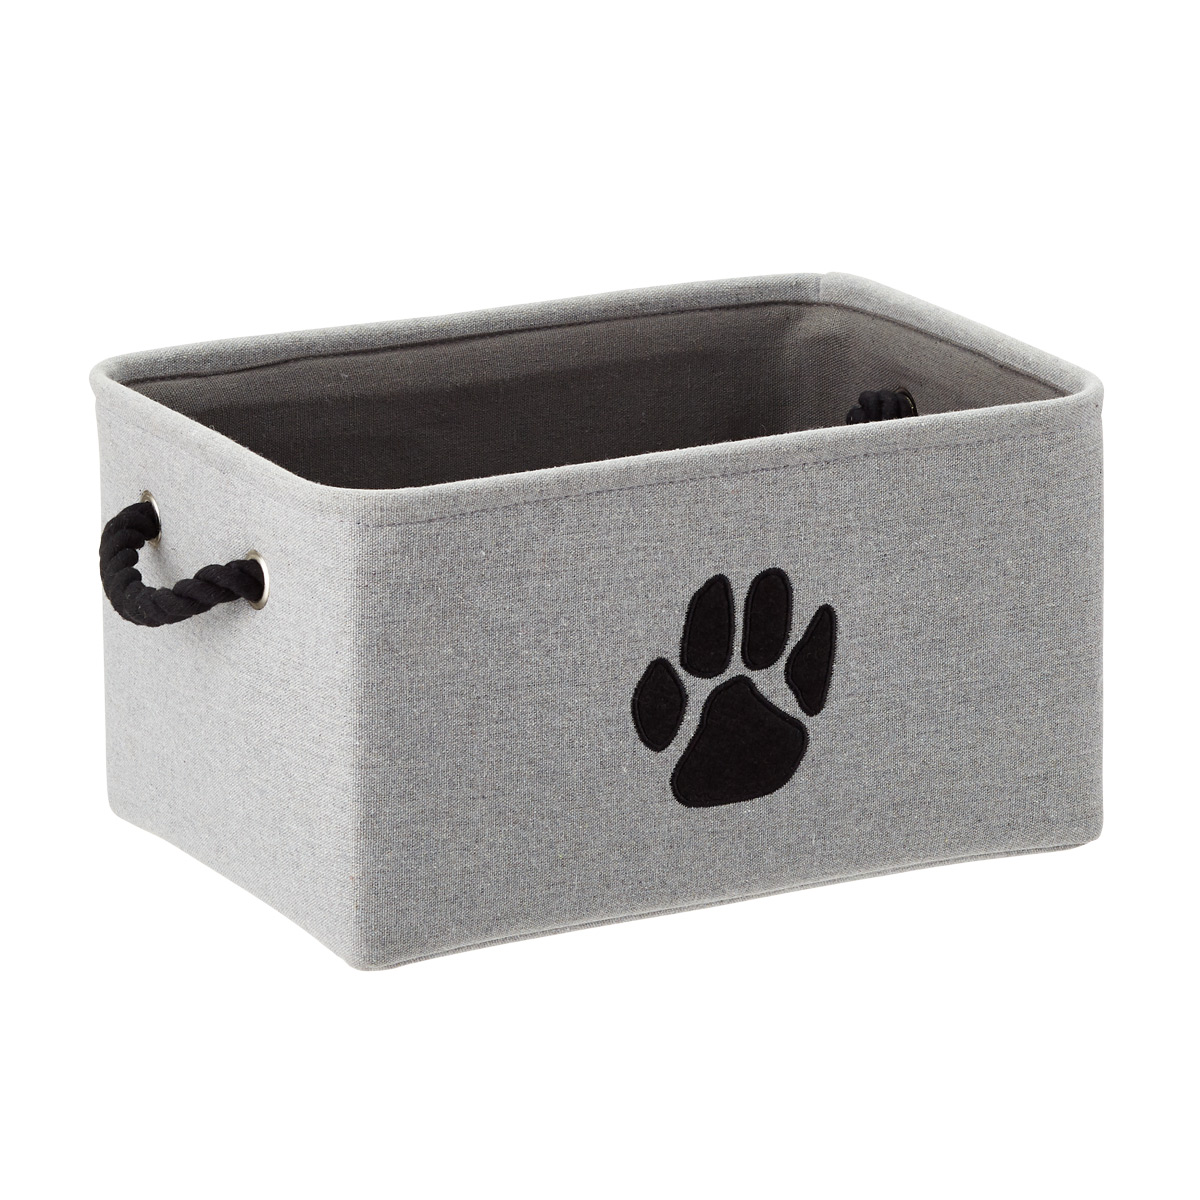 https://www.containerstore.com/catalogimages/360771/10076837-fabric-pet-bin-v2.jpg